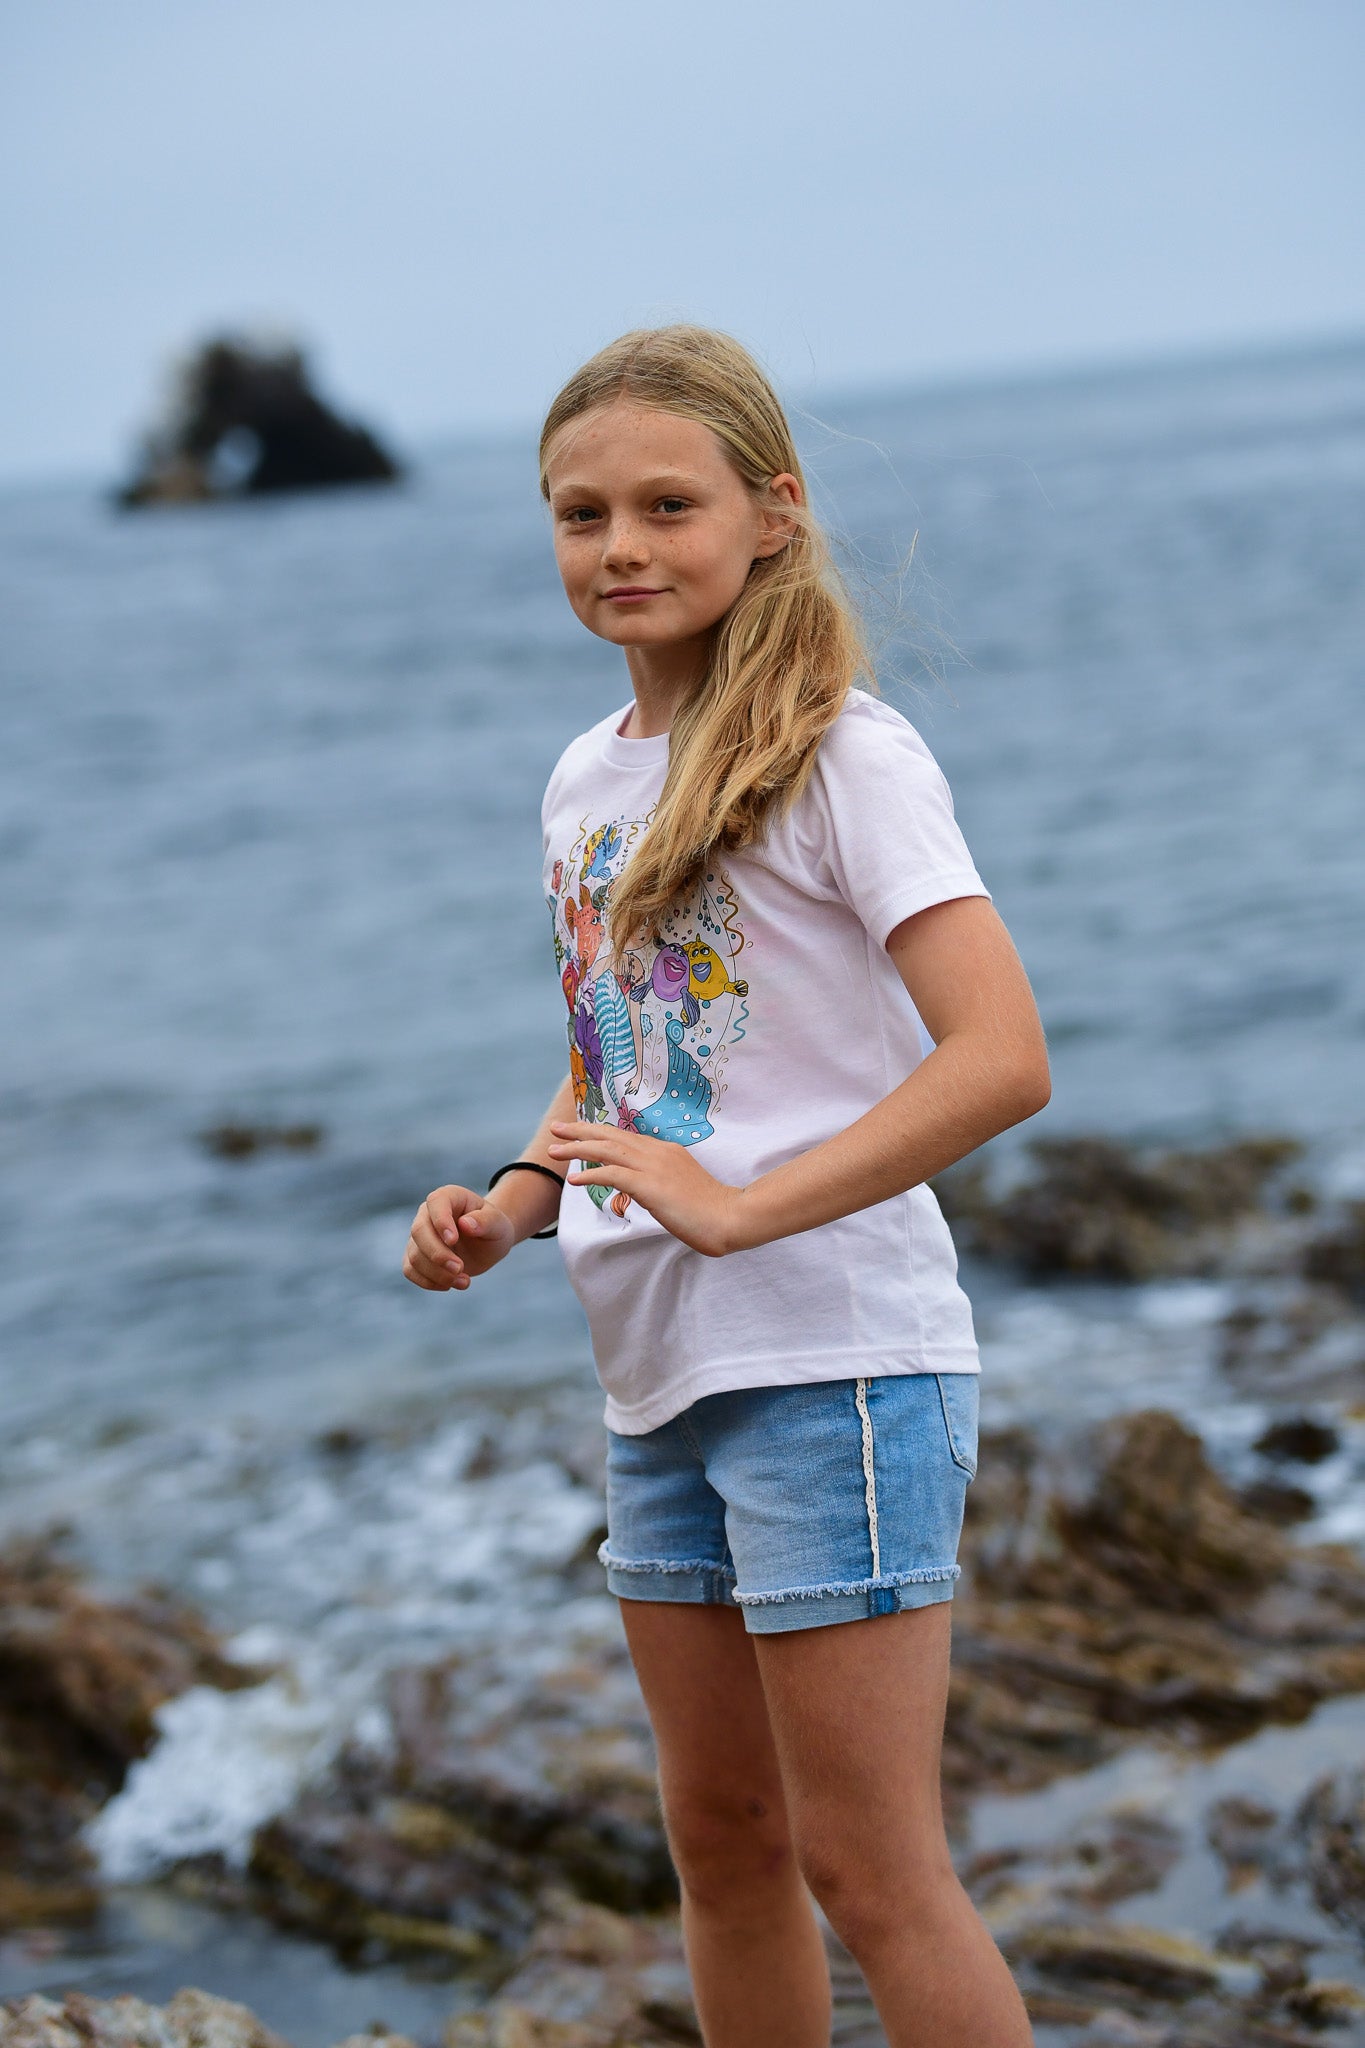 North Shore Girls illustrated graphic tee for girls who love the ocean and art